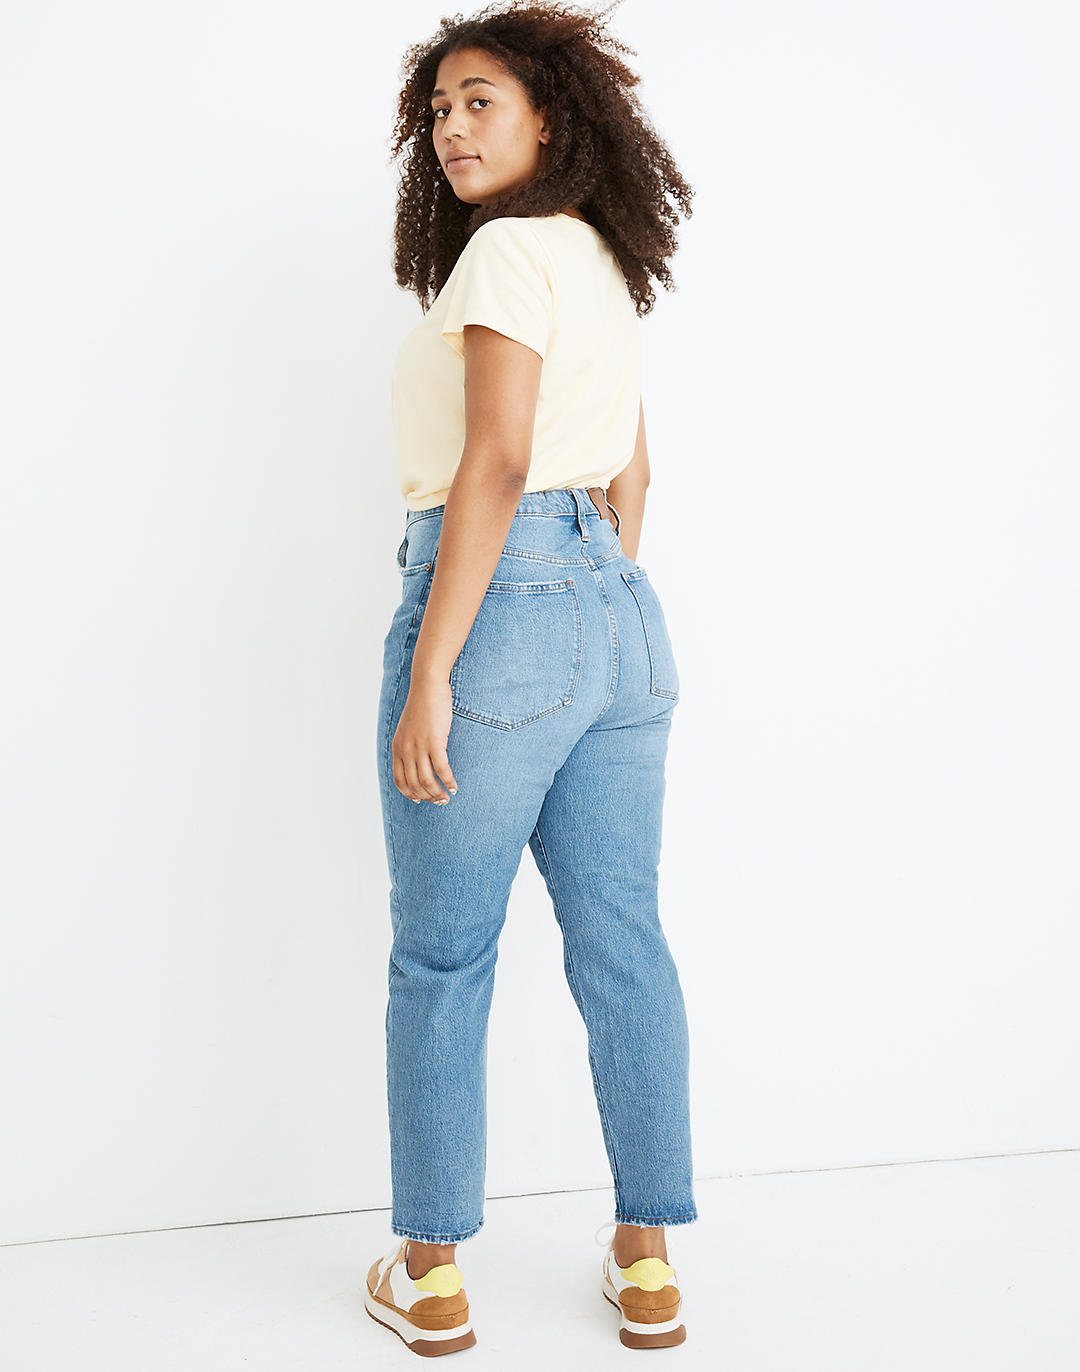 Women's Classic Straight Jeans in Nearwood Wash | Madewell